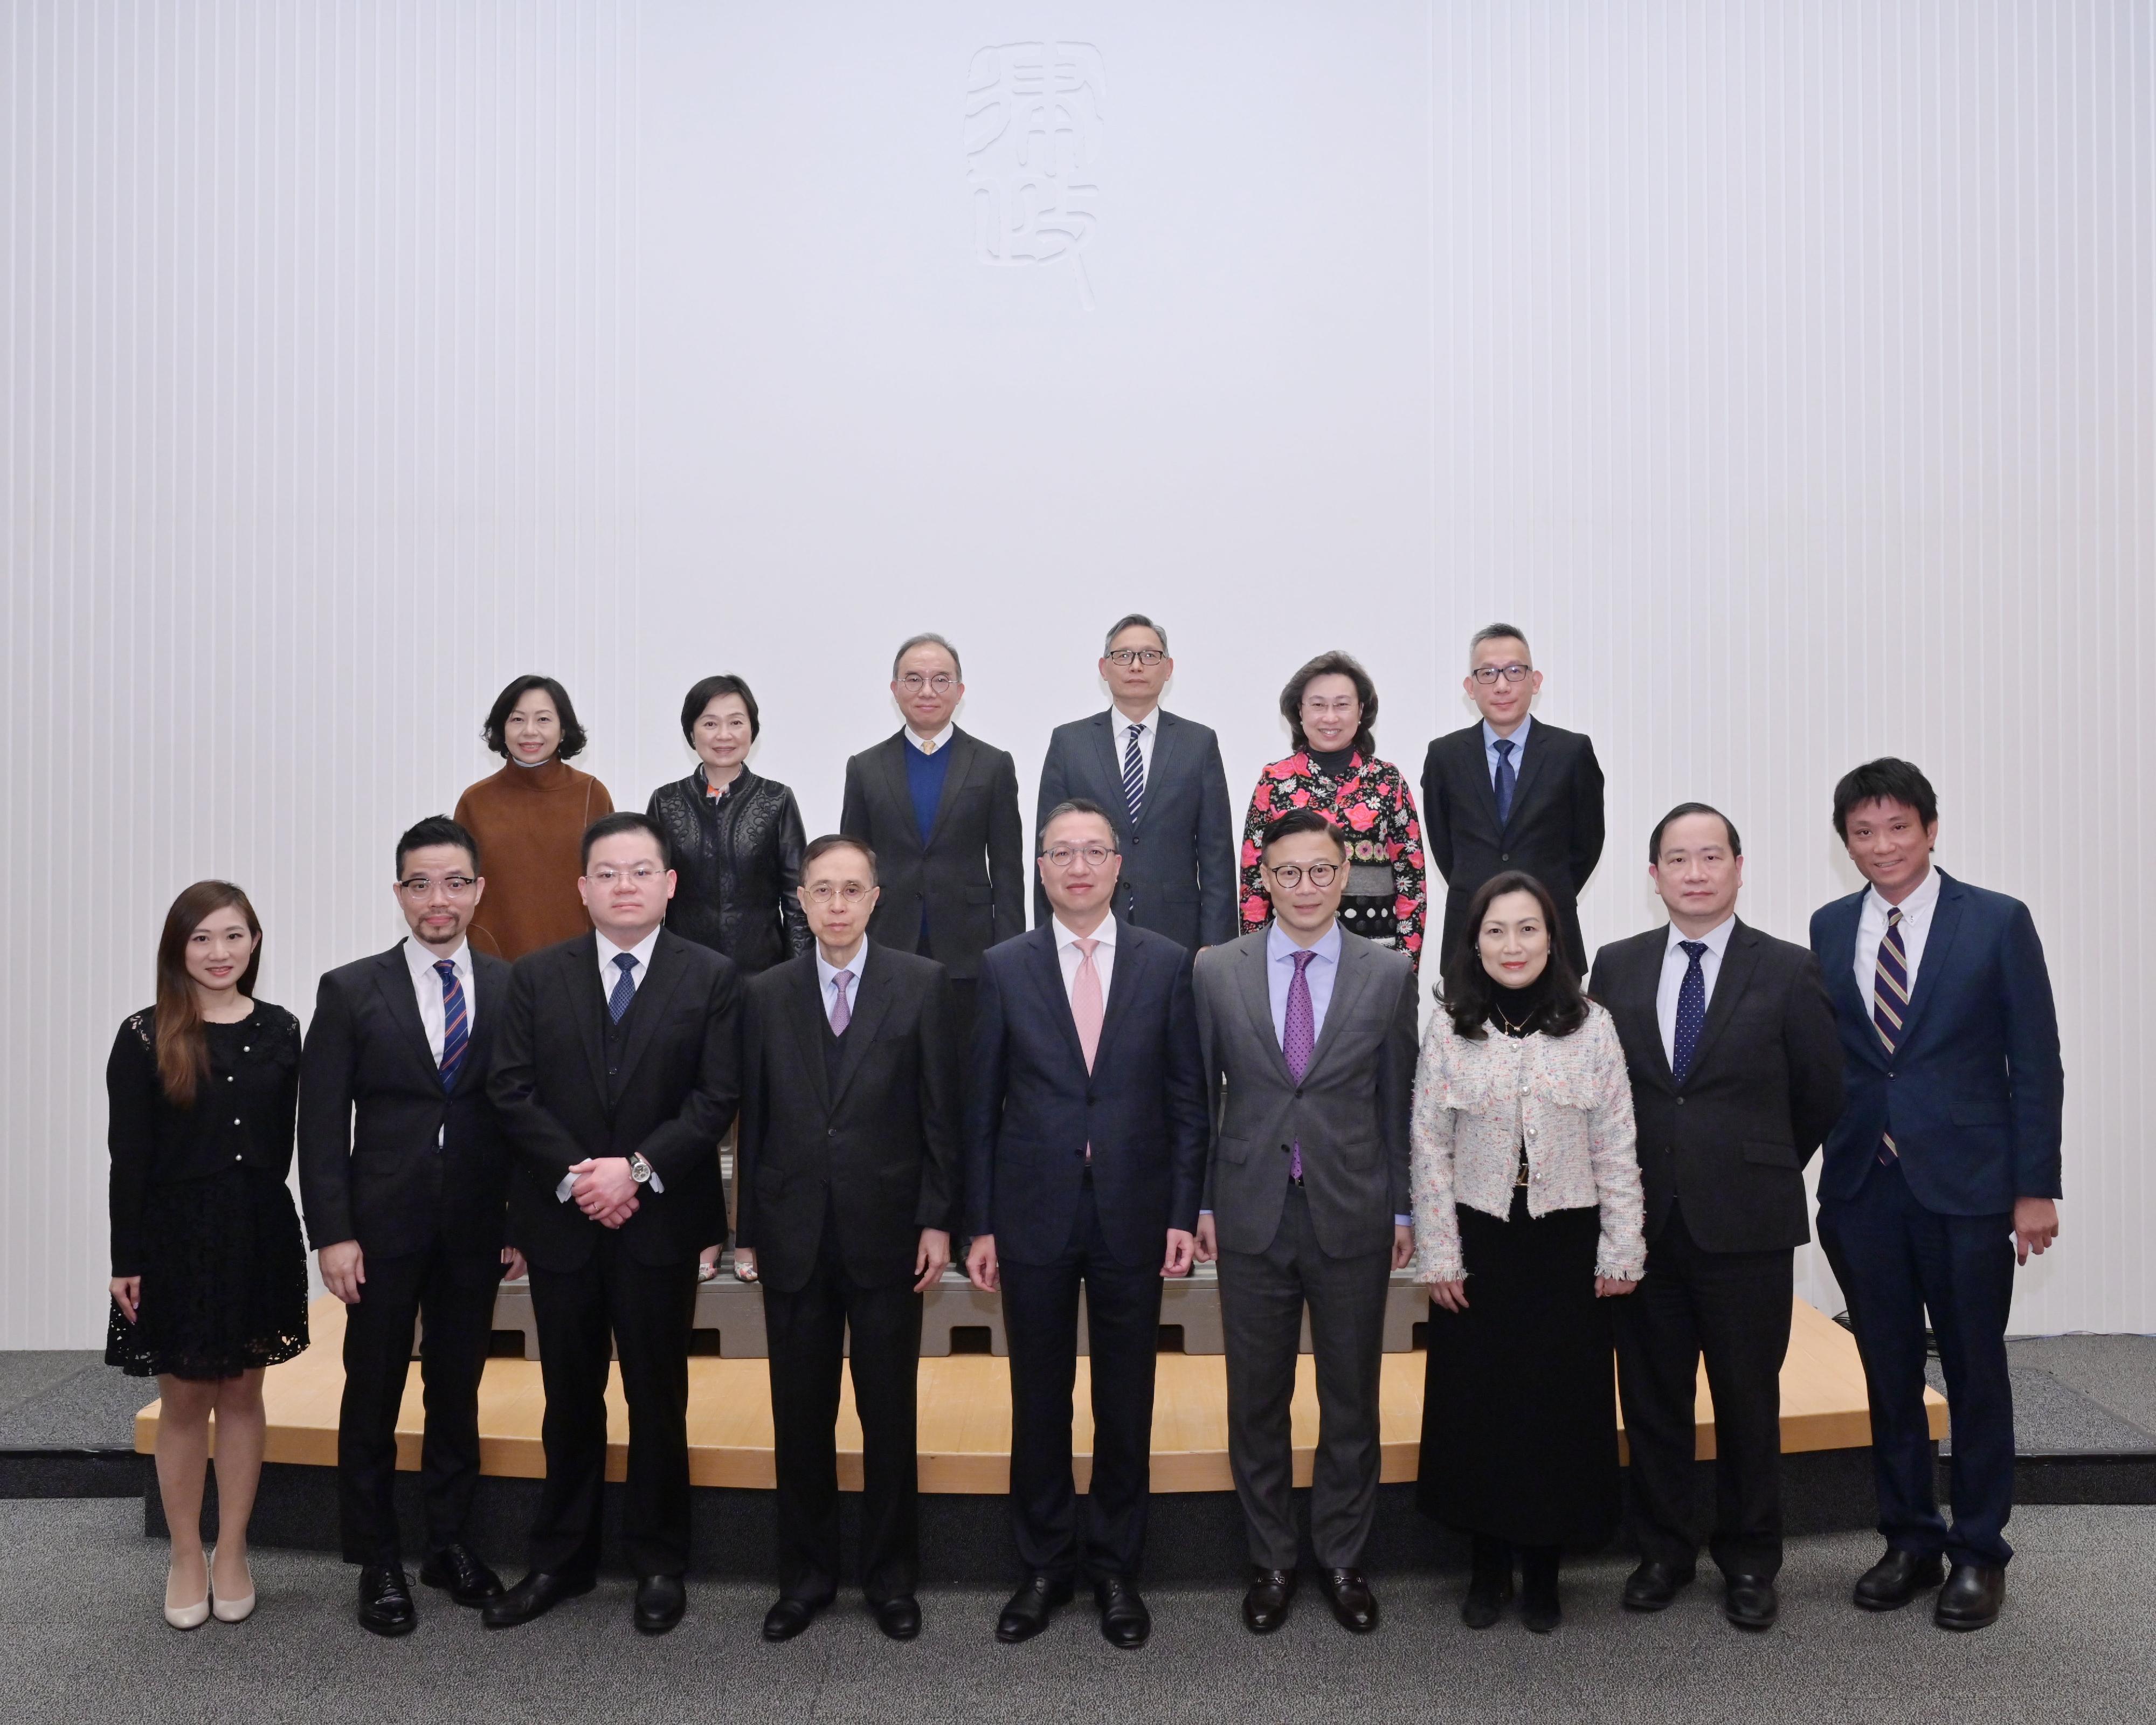 The Department of Justice's Steering Committee on Rule of Law Education held its first meeting this afternoon (February 28). Photo shows the Chairperson of the Steering Committee and Secretary for Justice, Mr Paul Lam, SC (front row, centre), and the Vice-Chairperson of the Steering Committee and Deputy Secretary for Justice, Mr Cheung Kwok-kwan (front row, fourth right), with non-official committee members Mr Justice Patrick Chan (front row, fourth left), Dr Peter Chan (front row, first right), Mr Jonathan Chang, SC (front row, third left), Mr Matthew Cheung (front row, second left), Mr Wilson Chow (first row, second right), Ms Carmen Kan (front row, third right) and Ms Sharon Tam (front row, first left) before the meeting. Also present are official committee members the Secretary for Constitutional and Mainland Affairs, Mr Erick Tsang Kwok-wai (back row, third left); the Secretary for the Civil Service, Mrs Ingrid Yeung (back row, second right); the Secretary for Education, Dr Choi Yuk-lin (back row, second left); the Secretary for Home and Youth Affairs, Miss Alice Mak (back row, first left); the Acting Secretary for Security, Mr Michael Cheuk (back row, third right); and the Solicitor General of the Department of Justice, Mr Llewellyn Mui (back row, first right).